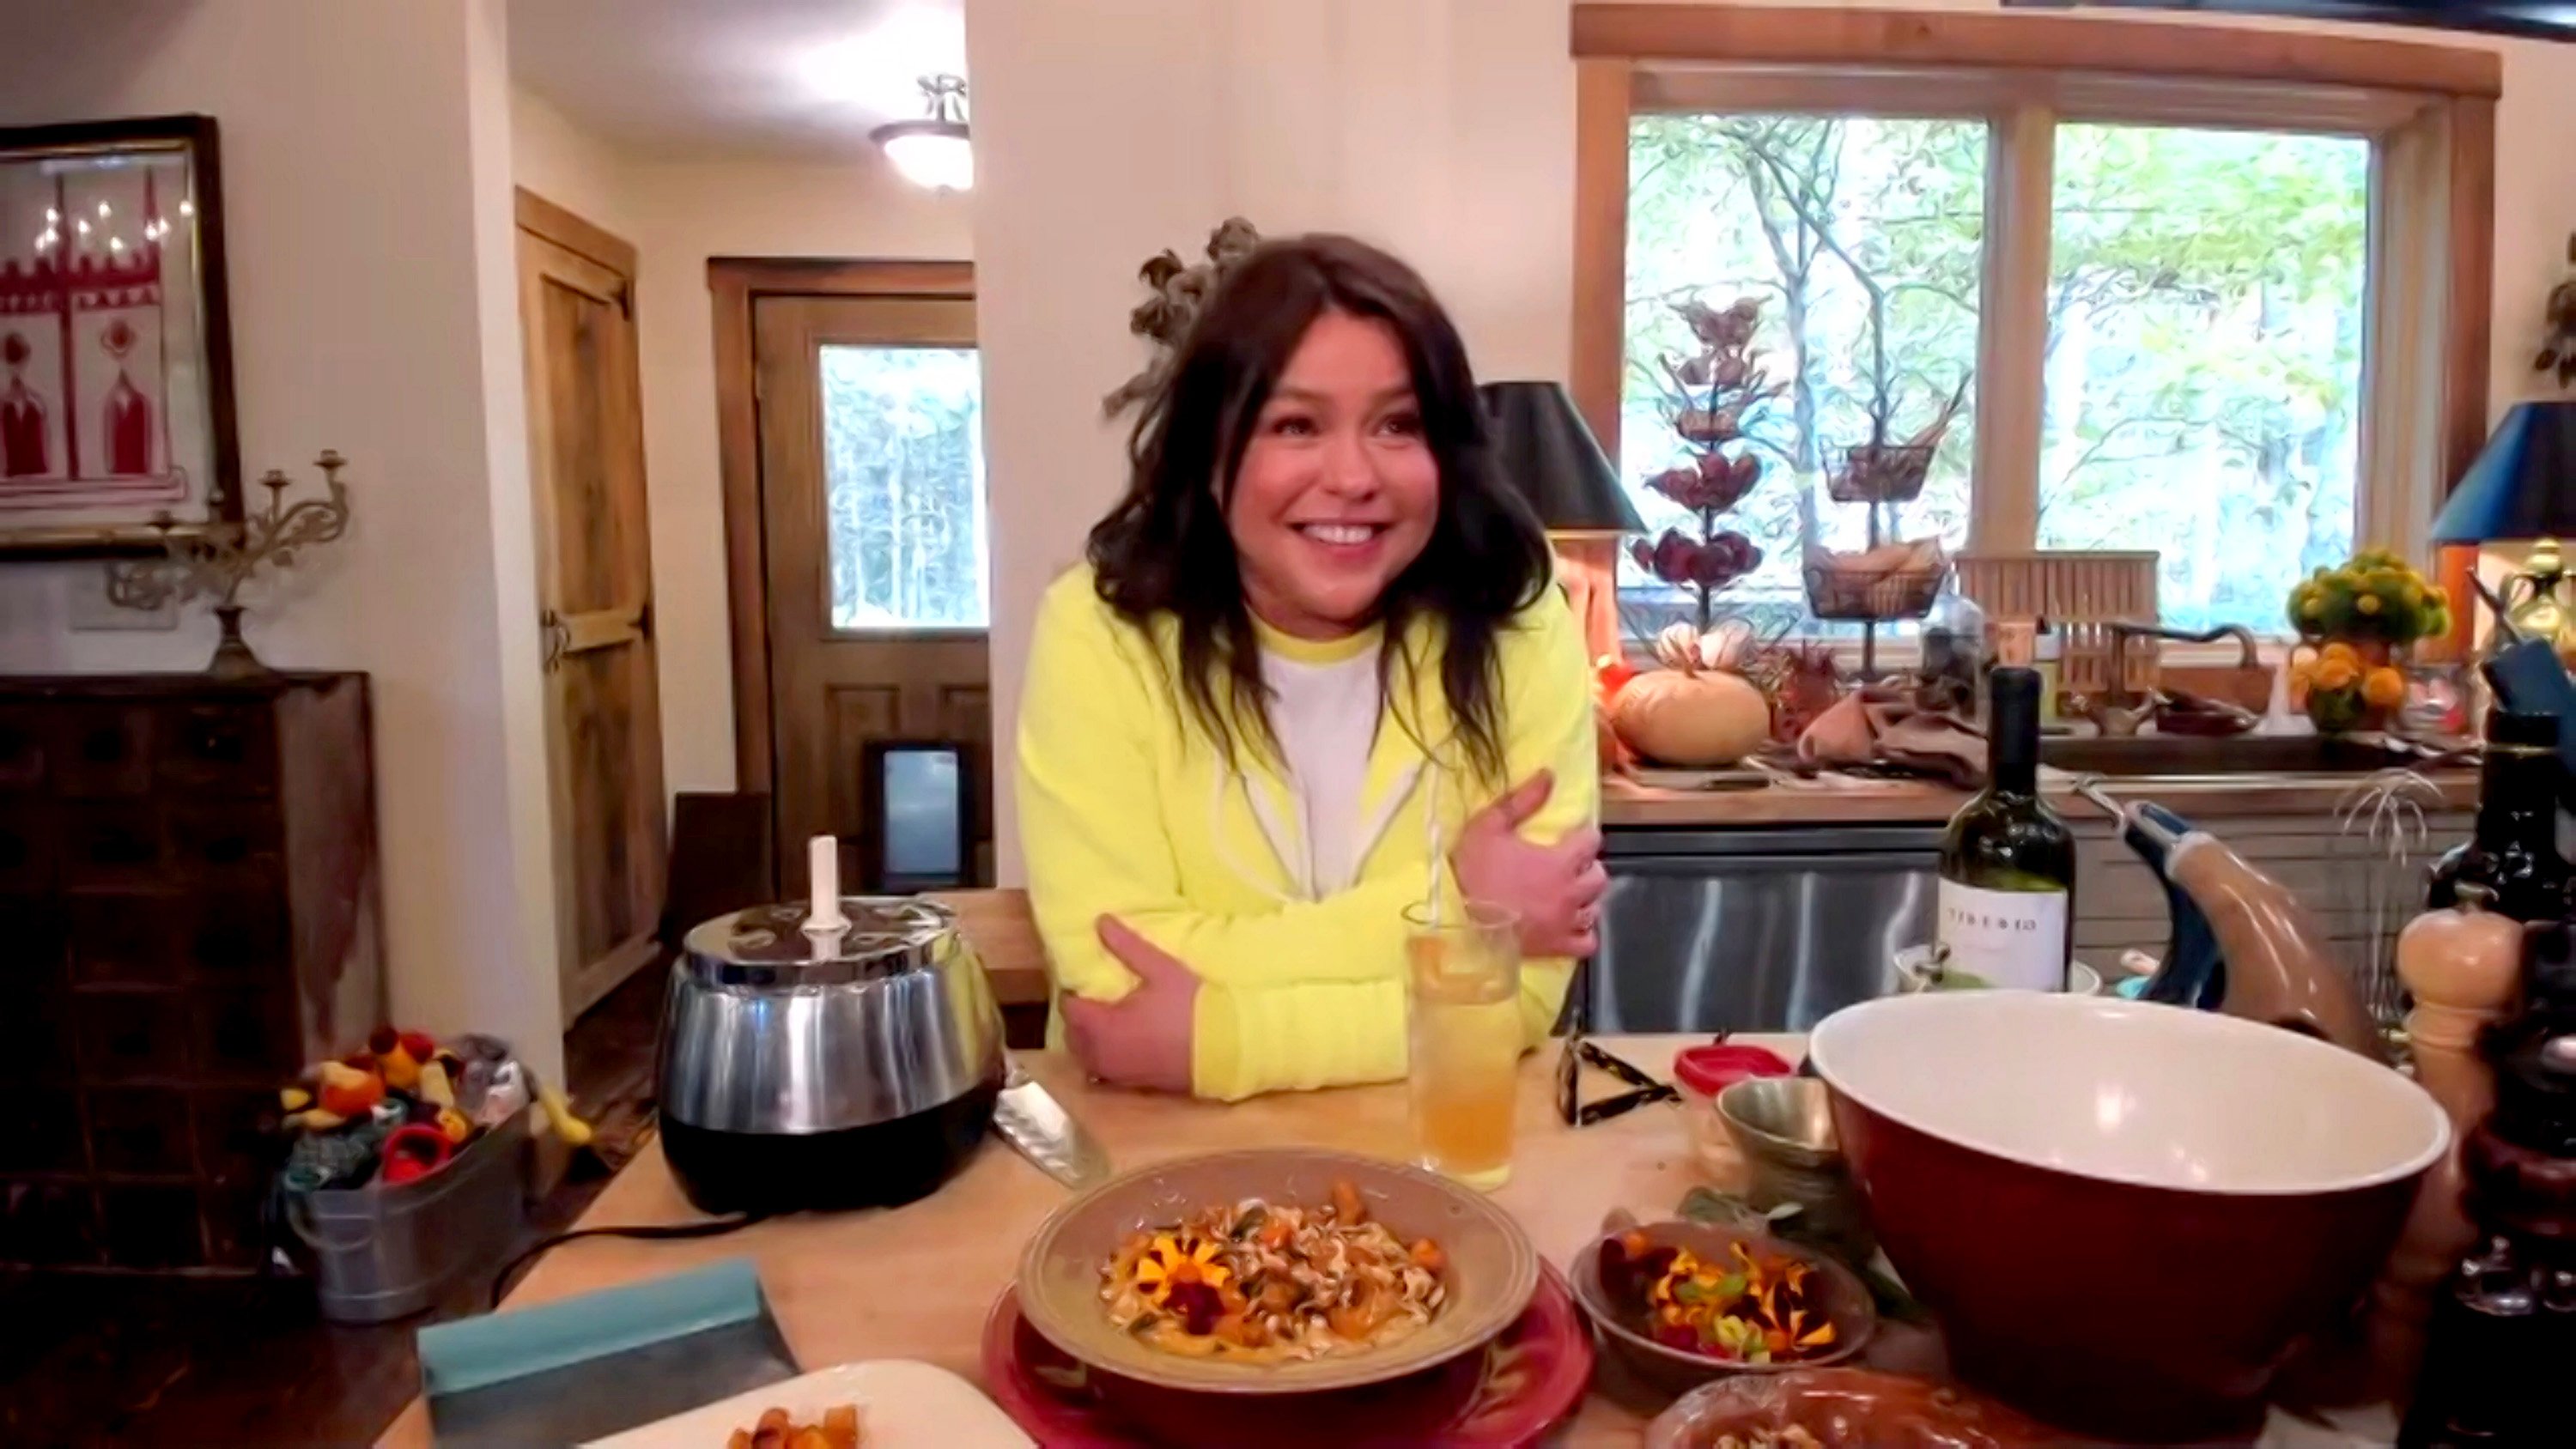 Mac and Cheese Dog Casserole recipe creator Rachael Ray leans against a counter filled with ingredients and cooking gear.